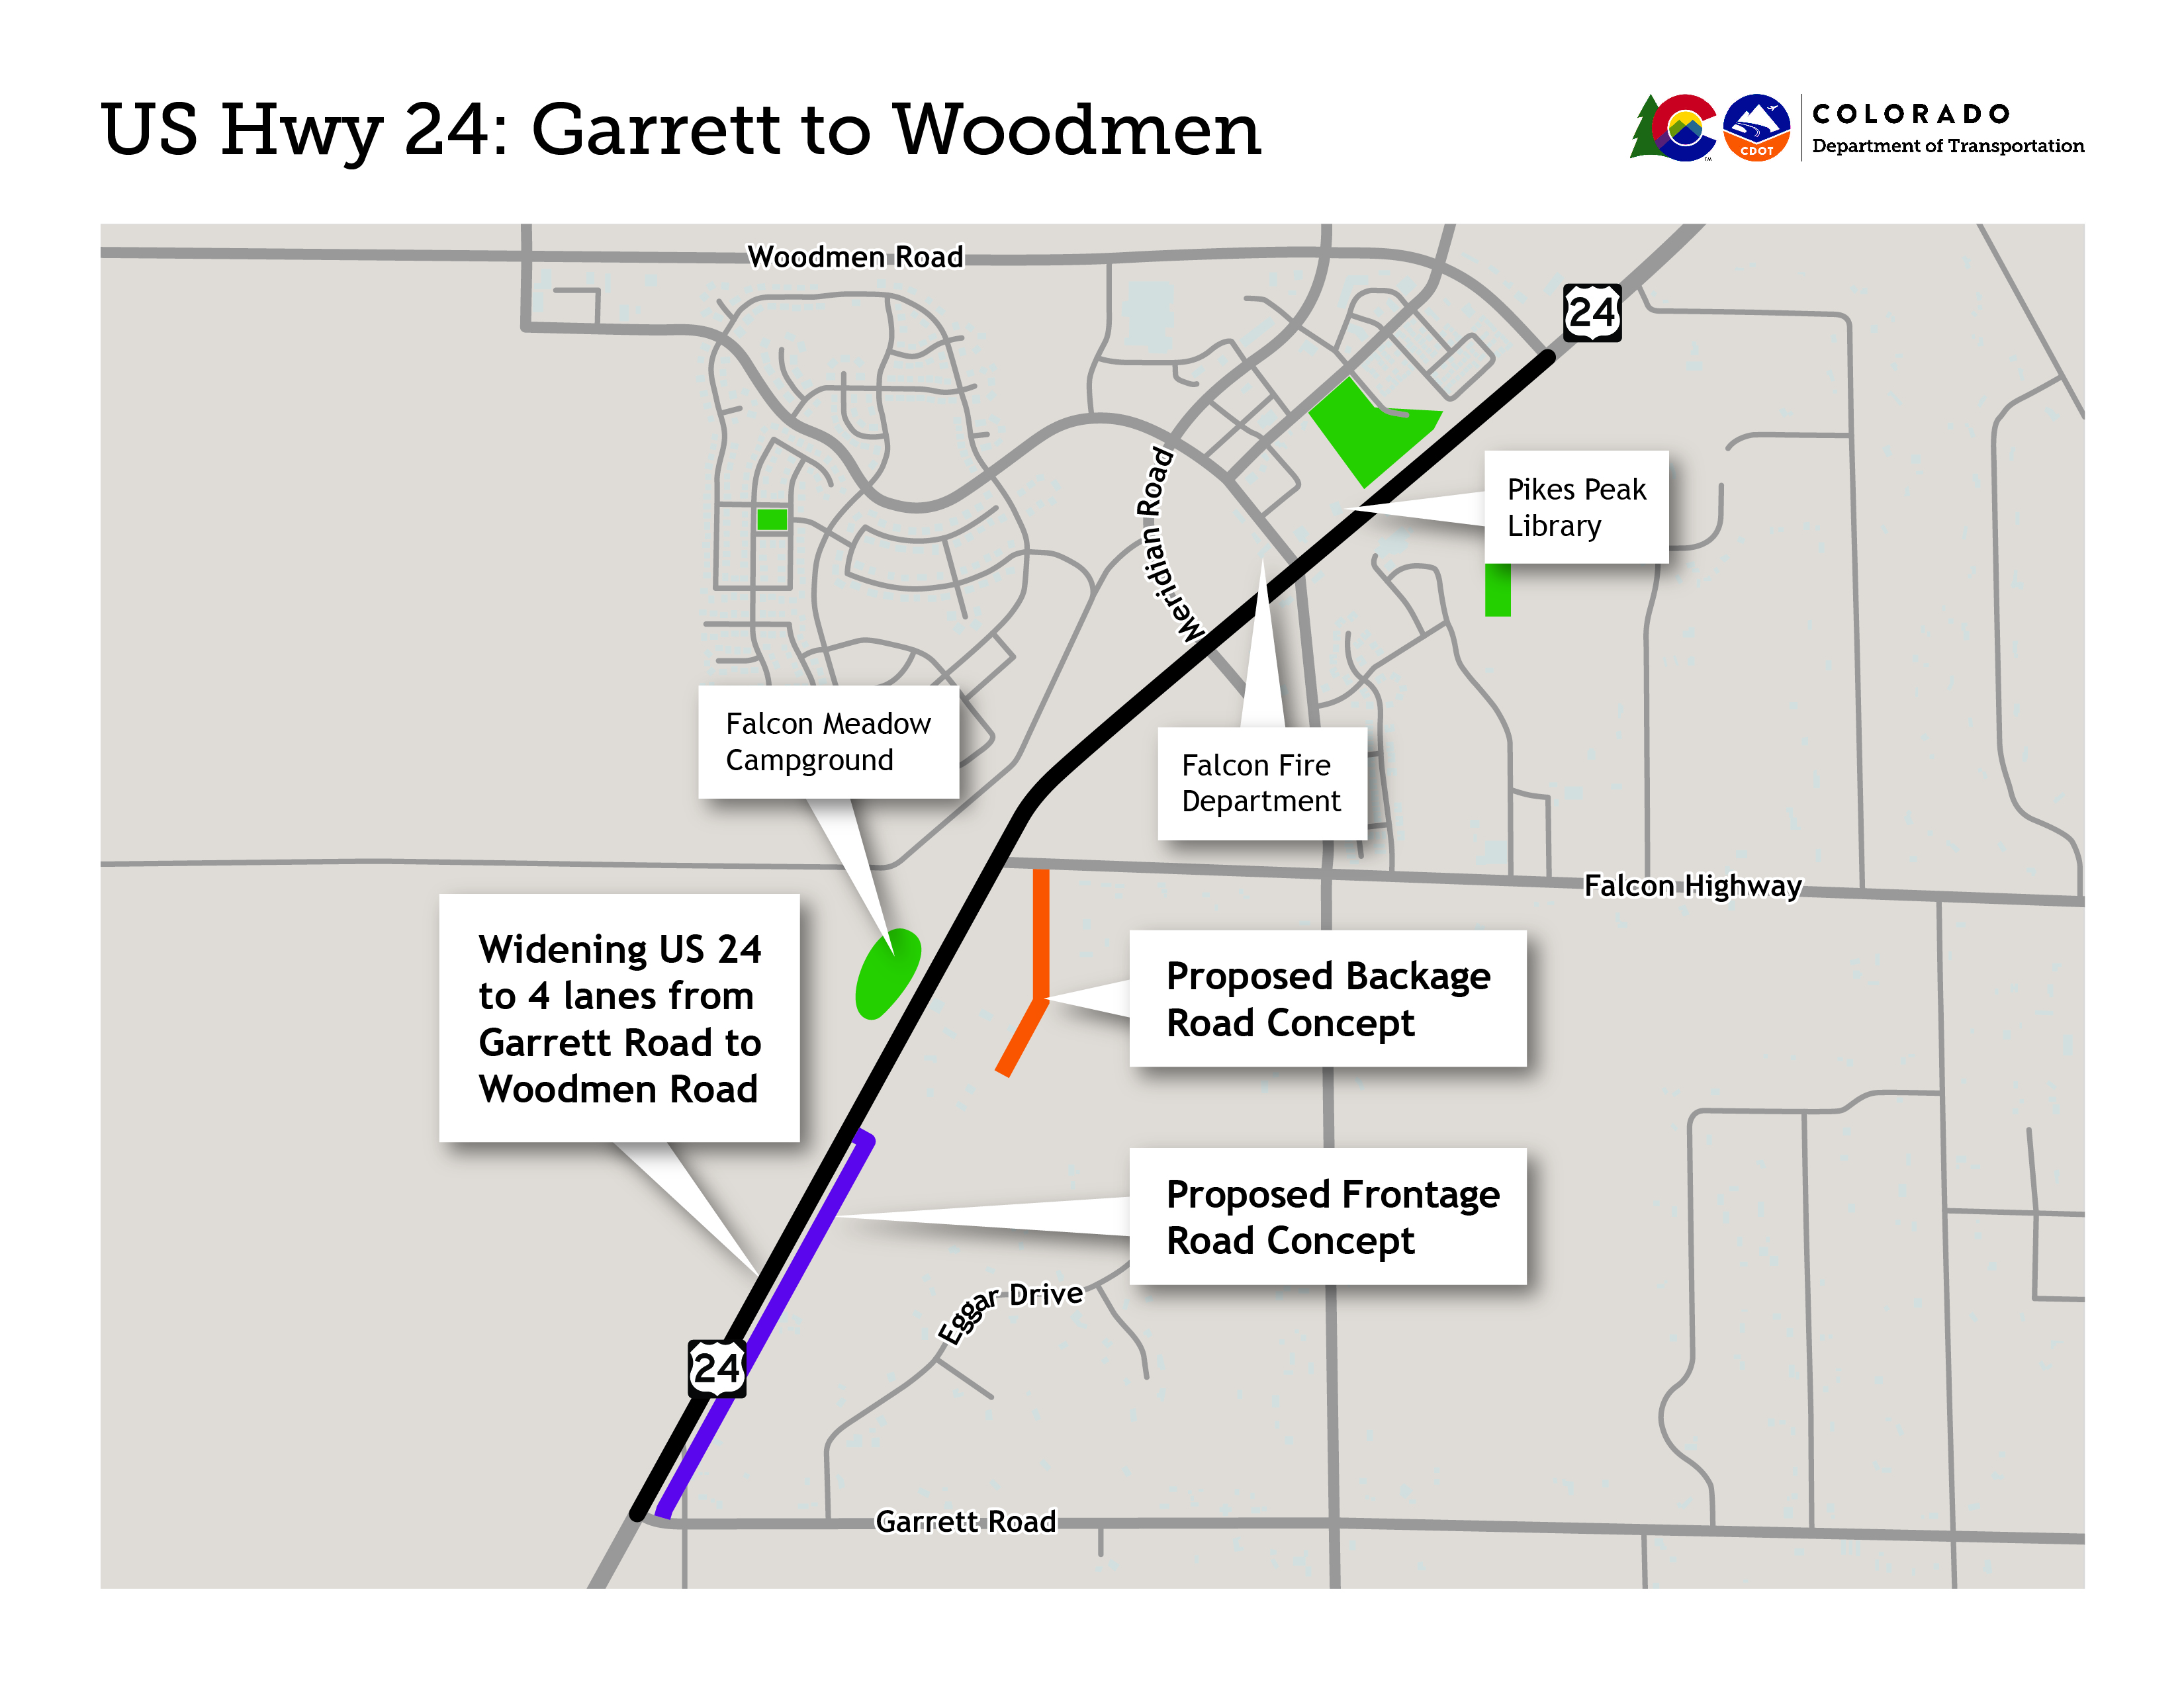 :  US Highway 24: Garrett to Woodman project area map that shows the project limits, the proposed Frontage Road Concept on the southern portion of the project area and the proposed Backage Road Concept off of Falcon Highway in the middle portion of the project area.